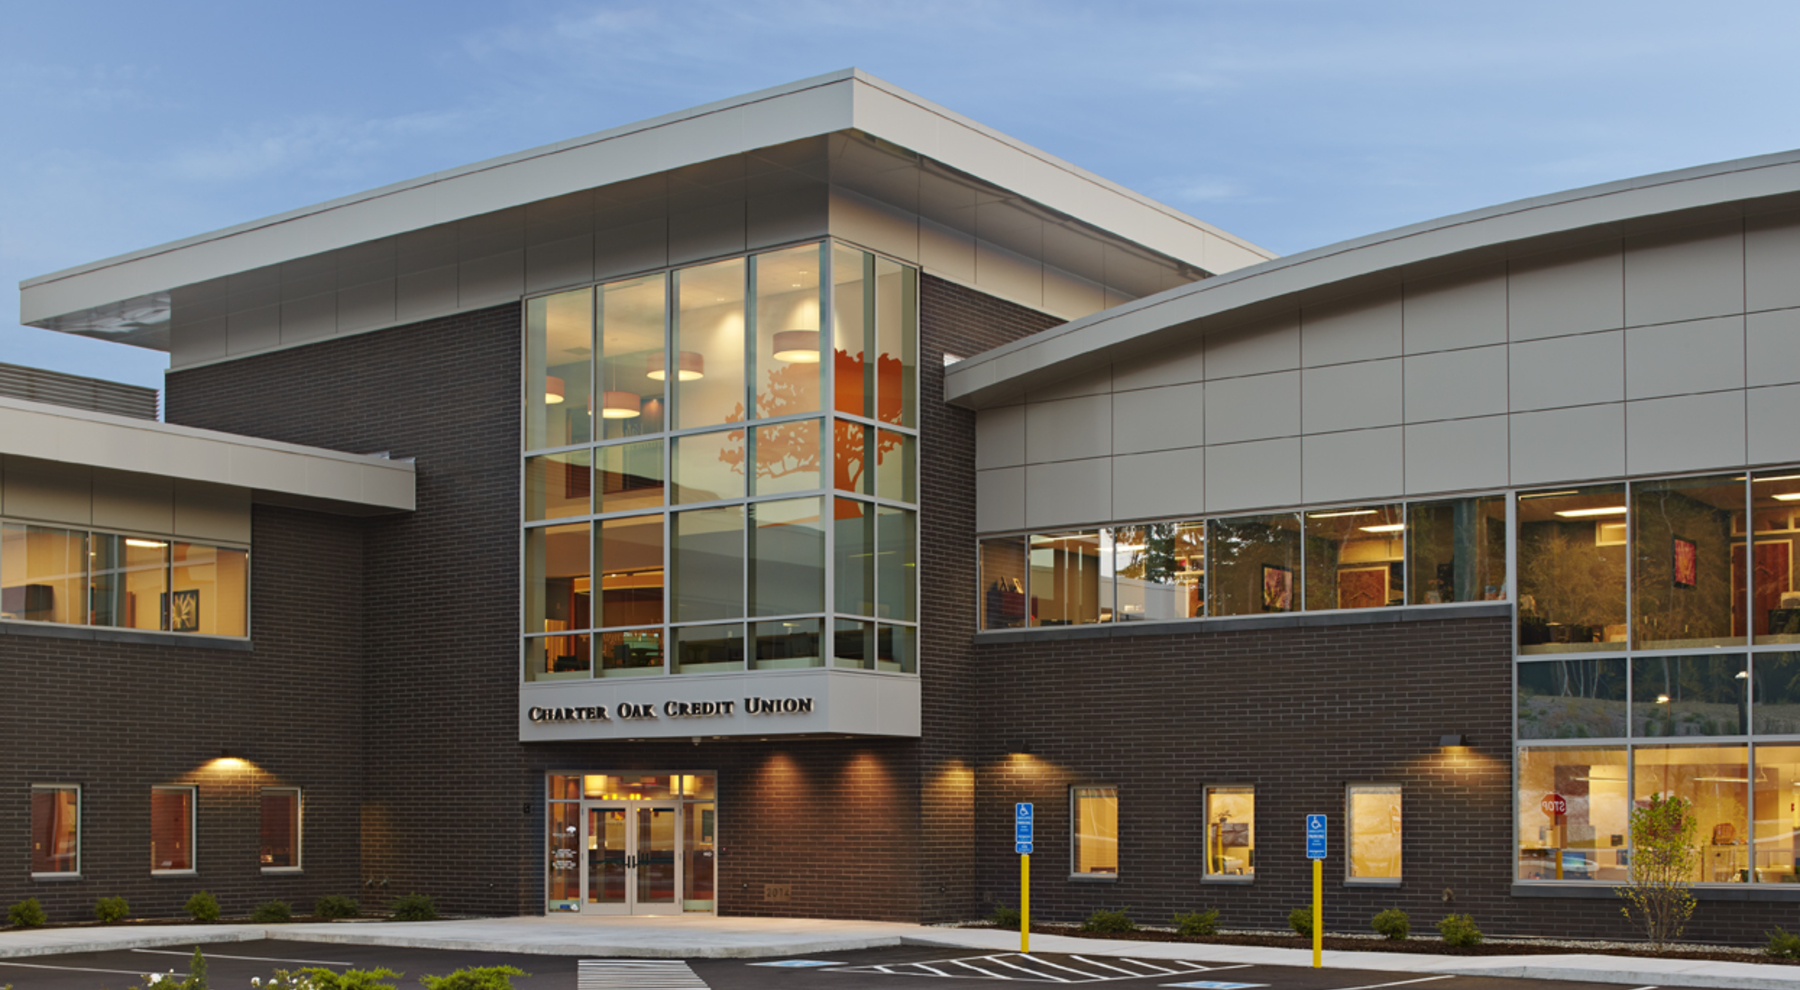 Charter Oak Federal Credit Union Insulated Panel Systems Kingspan USA